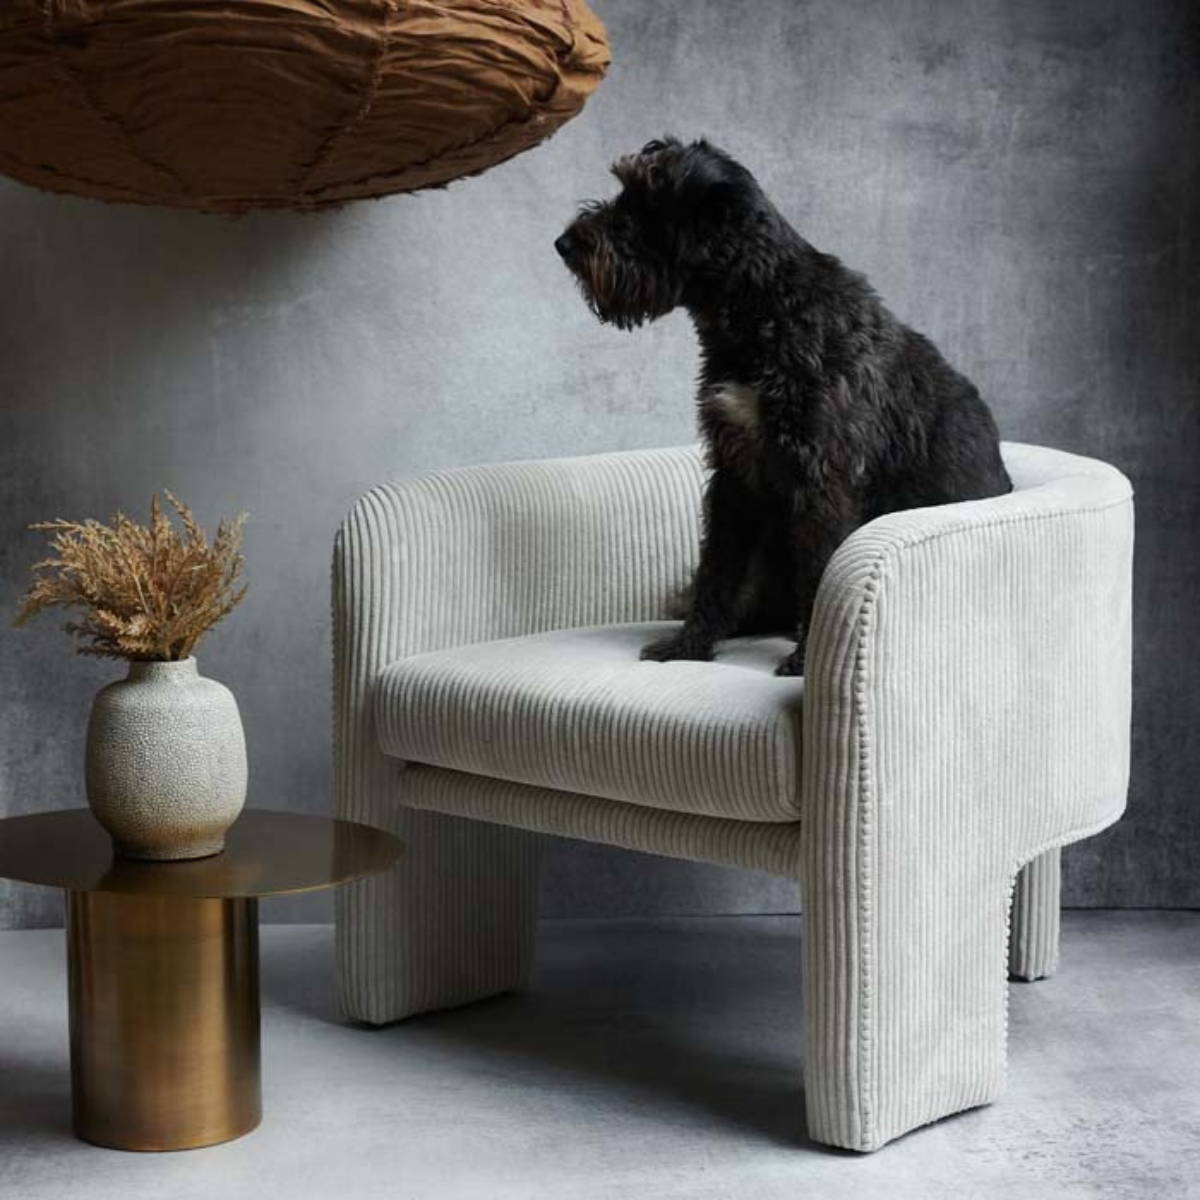 a black dog sitting a curvy chair made from cream cord next to low round gold table with a  vase and flowers